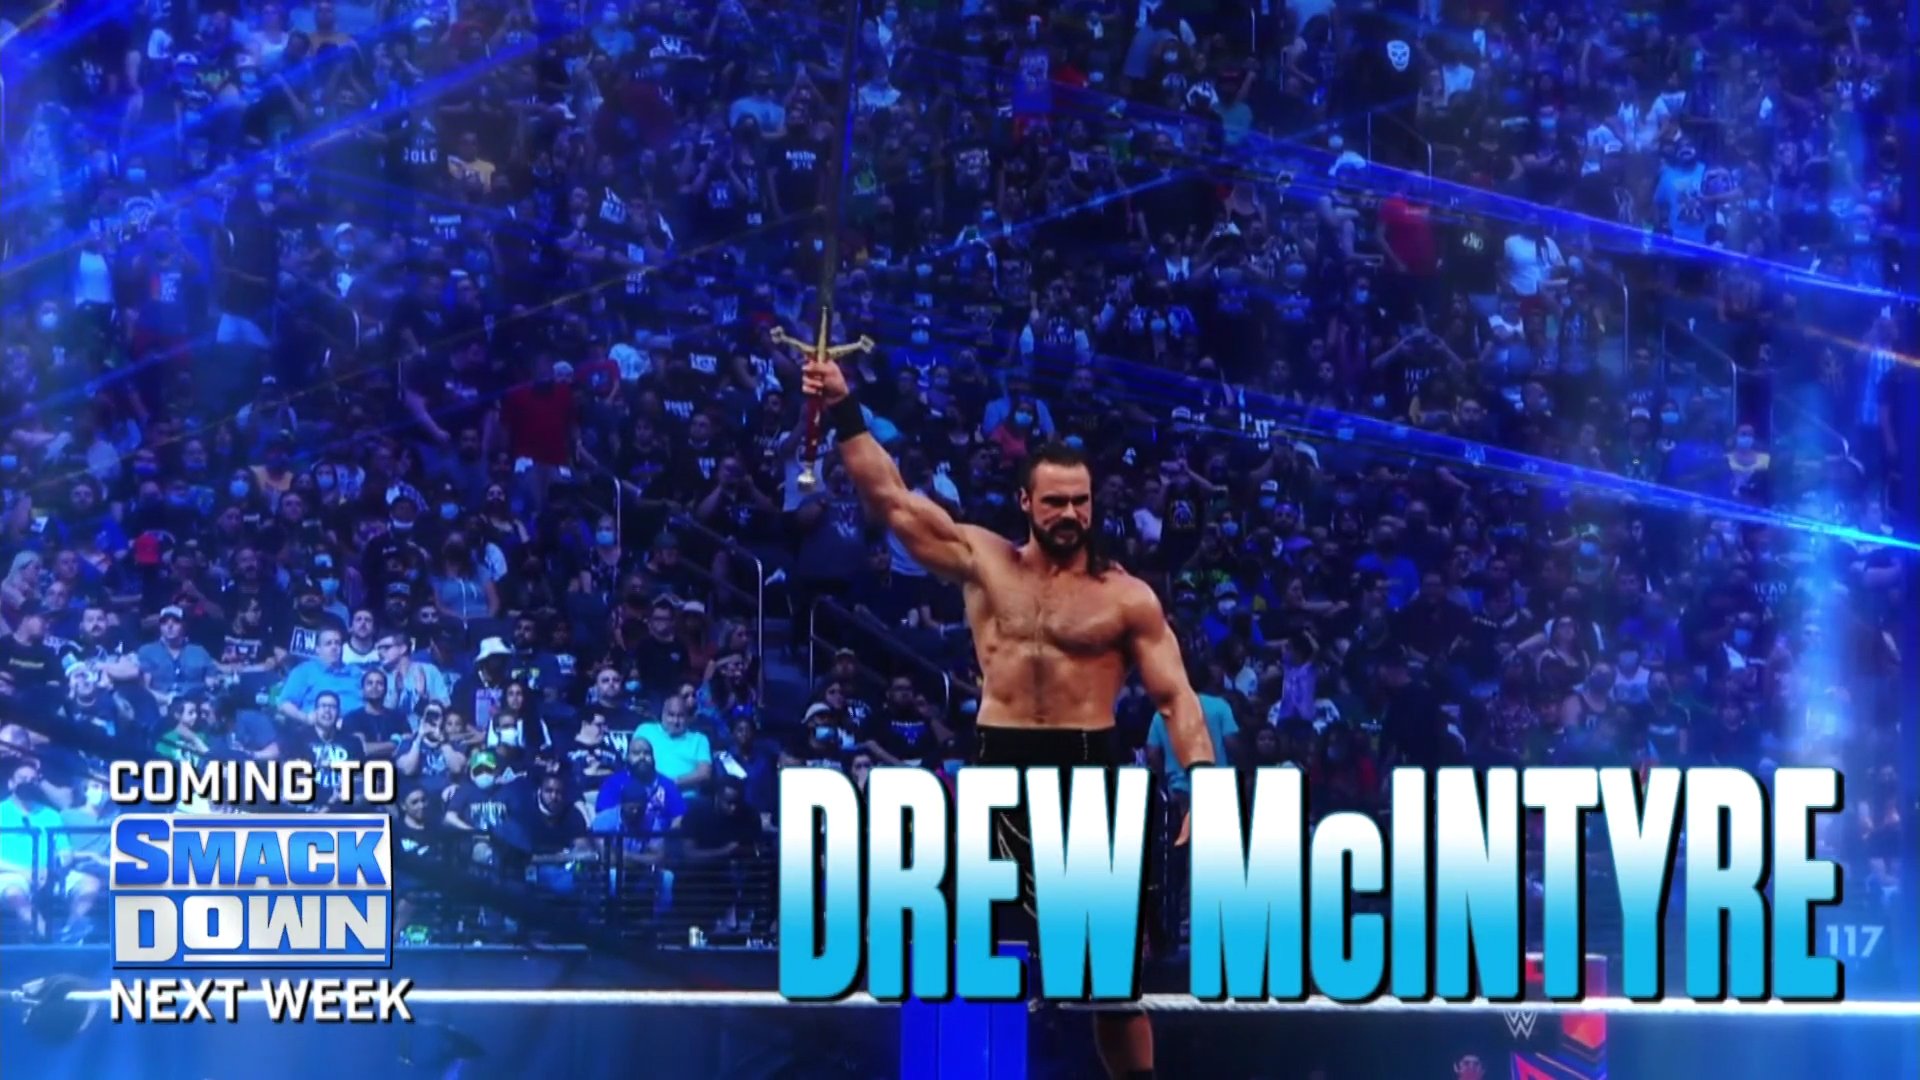 WWE Smackdown Match Card: From Sheamus to Drew McIntyre, check out the big names who will be arriving next week on Smackdown